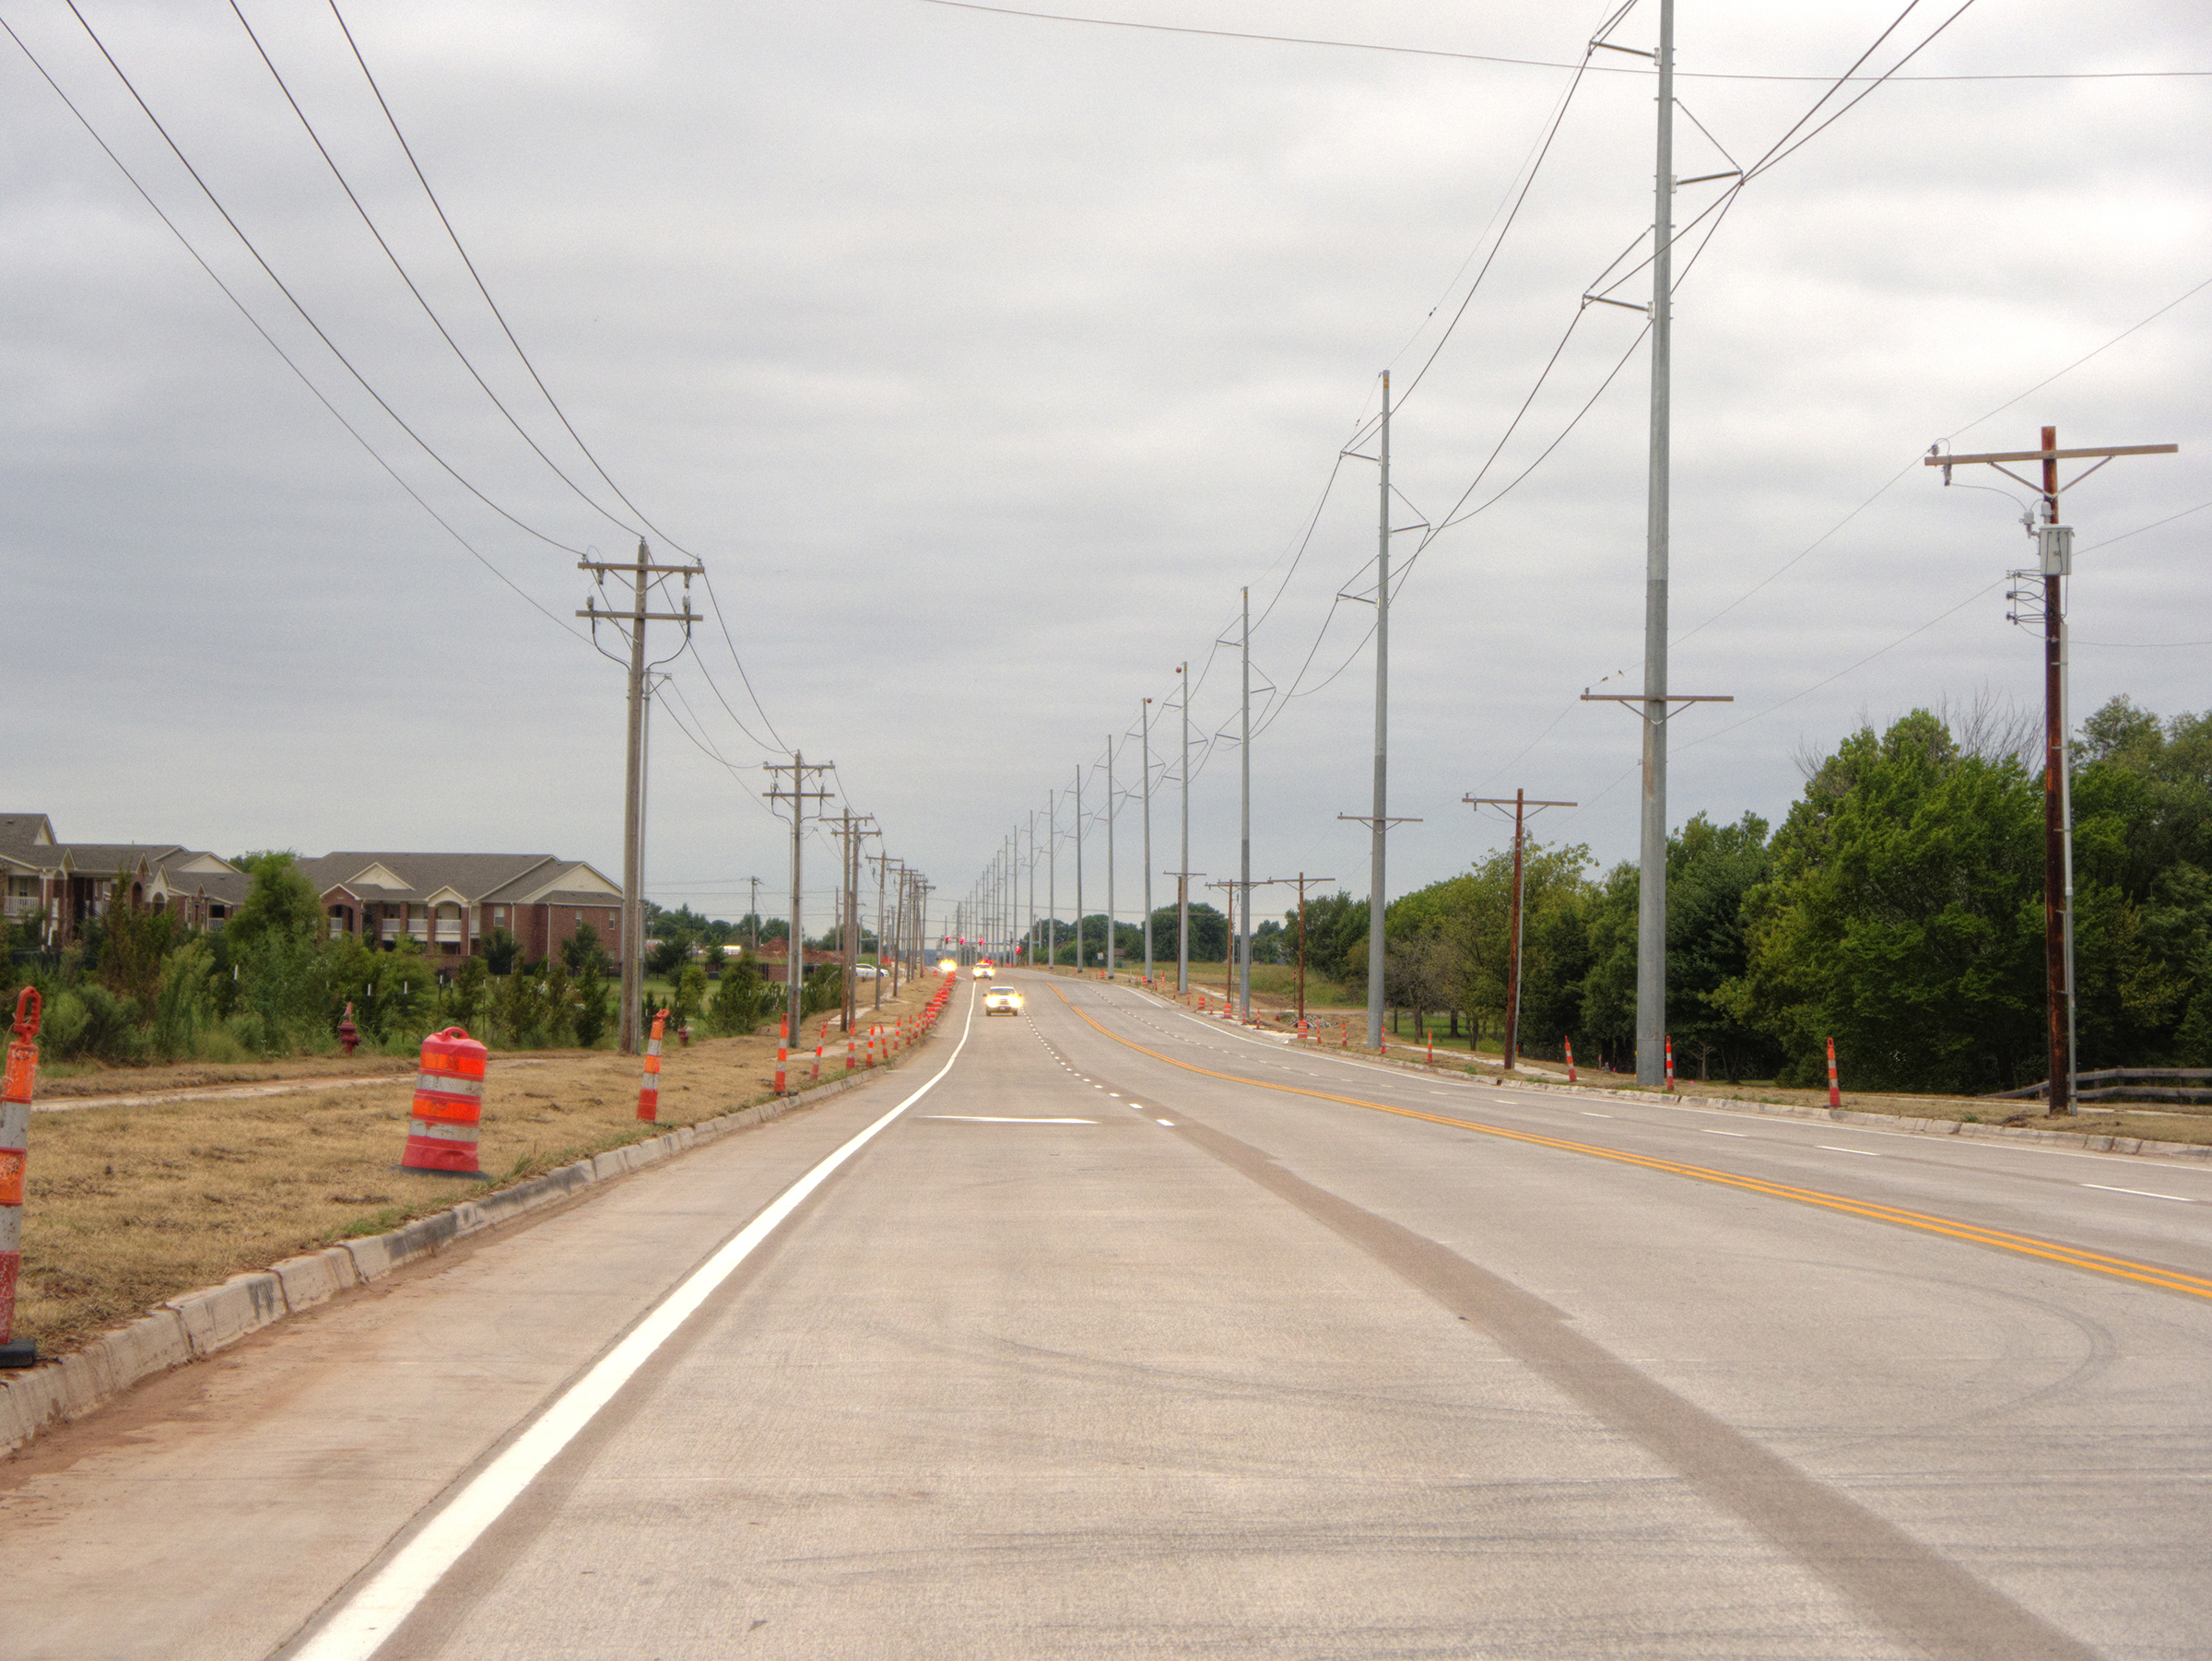 CEC® provided power delivery services to OG&E for roadway relocation projects.